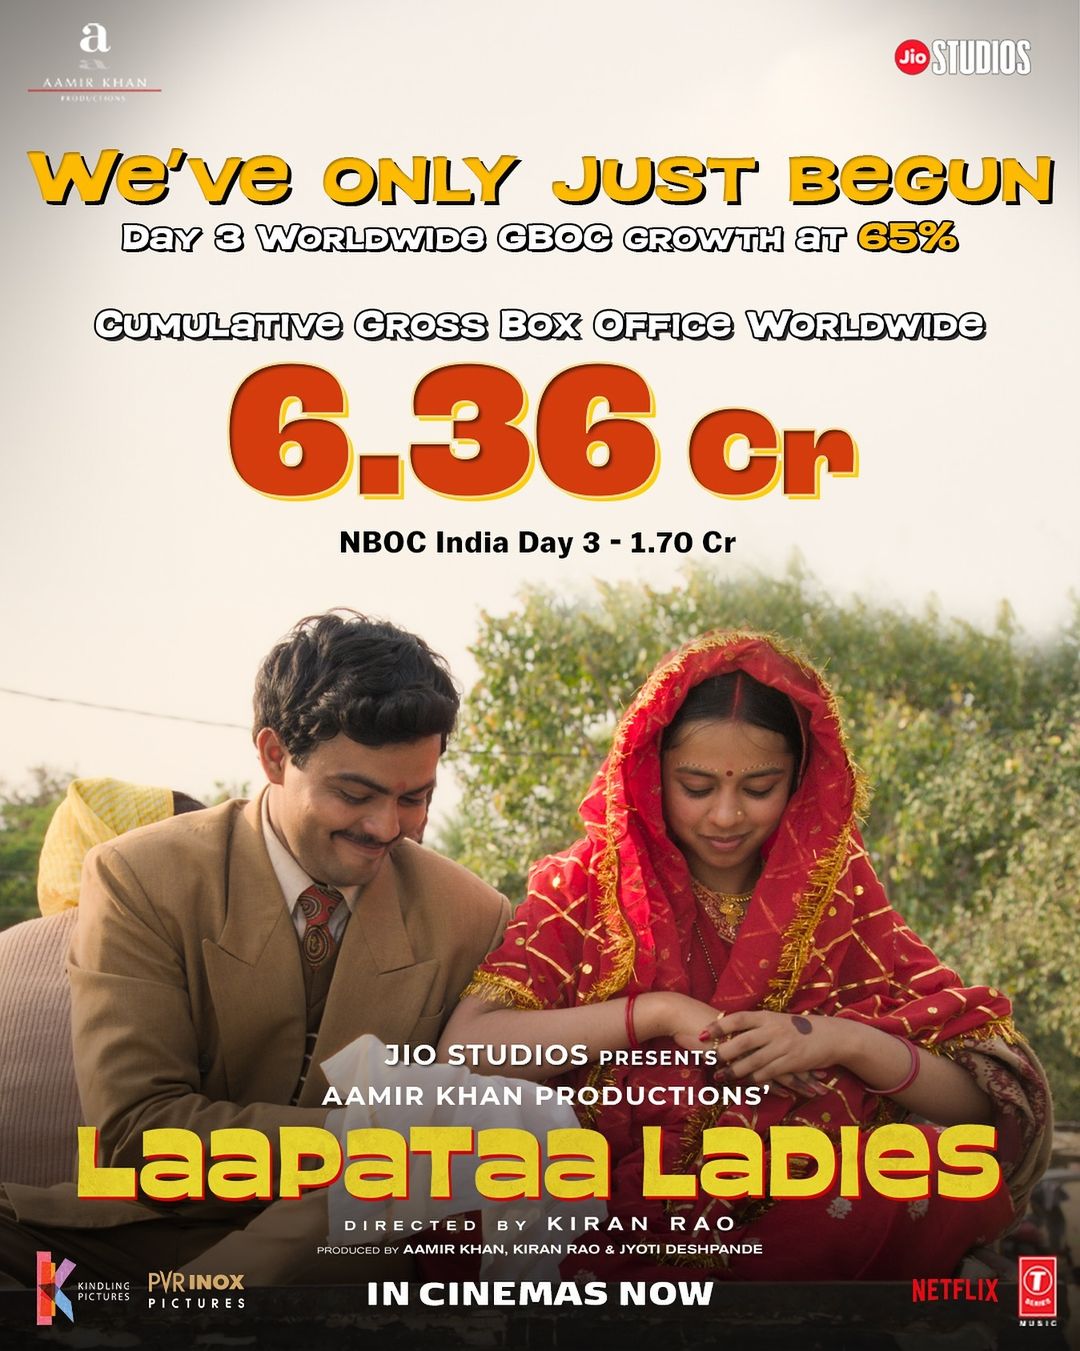 Laapataa Ladies Worldwide box office collections